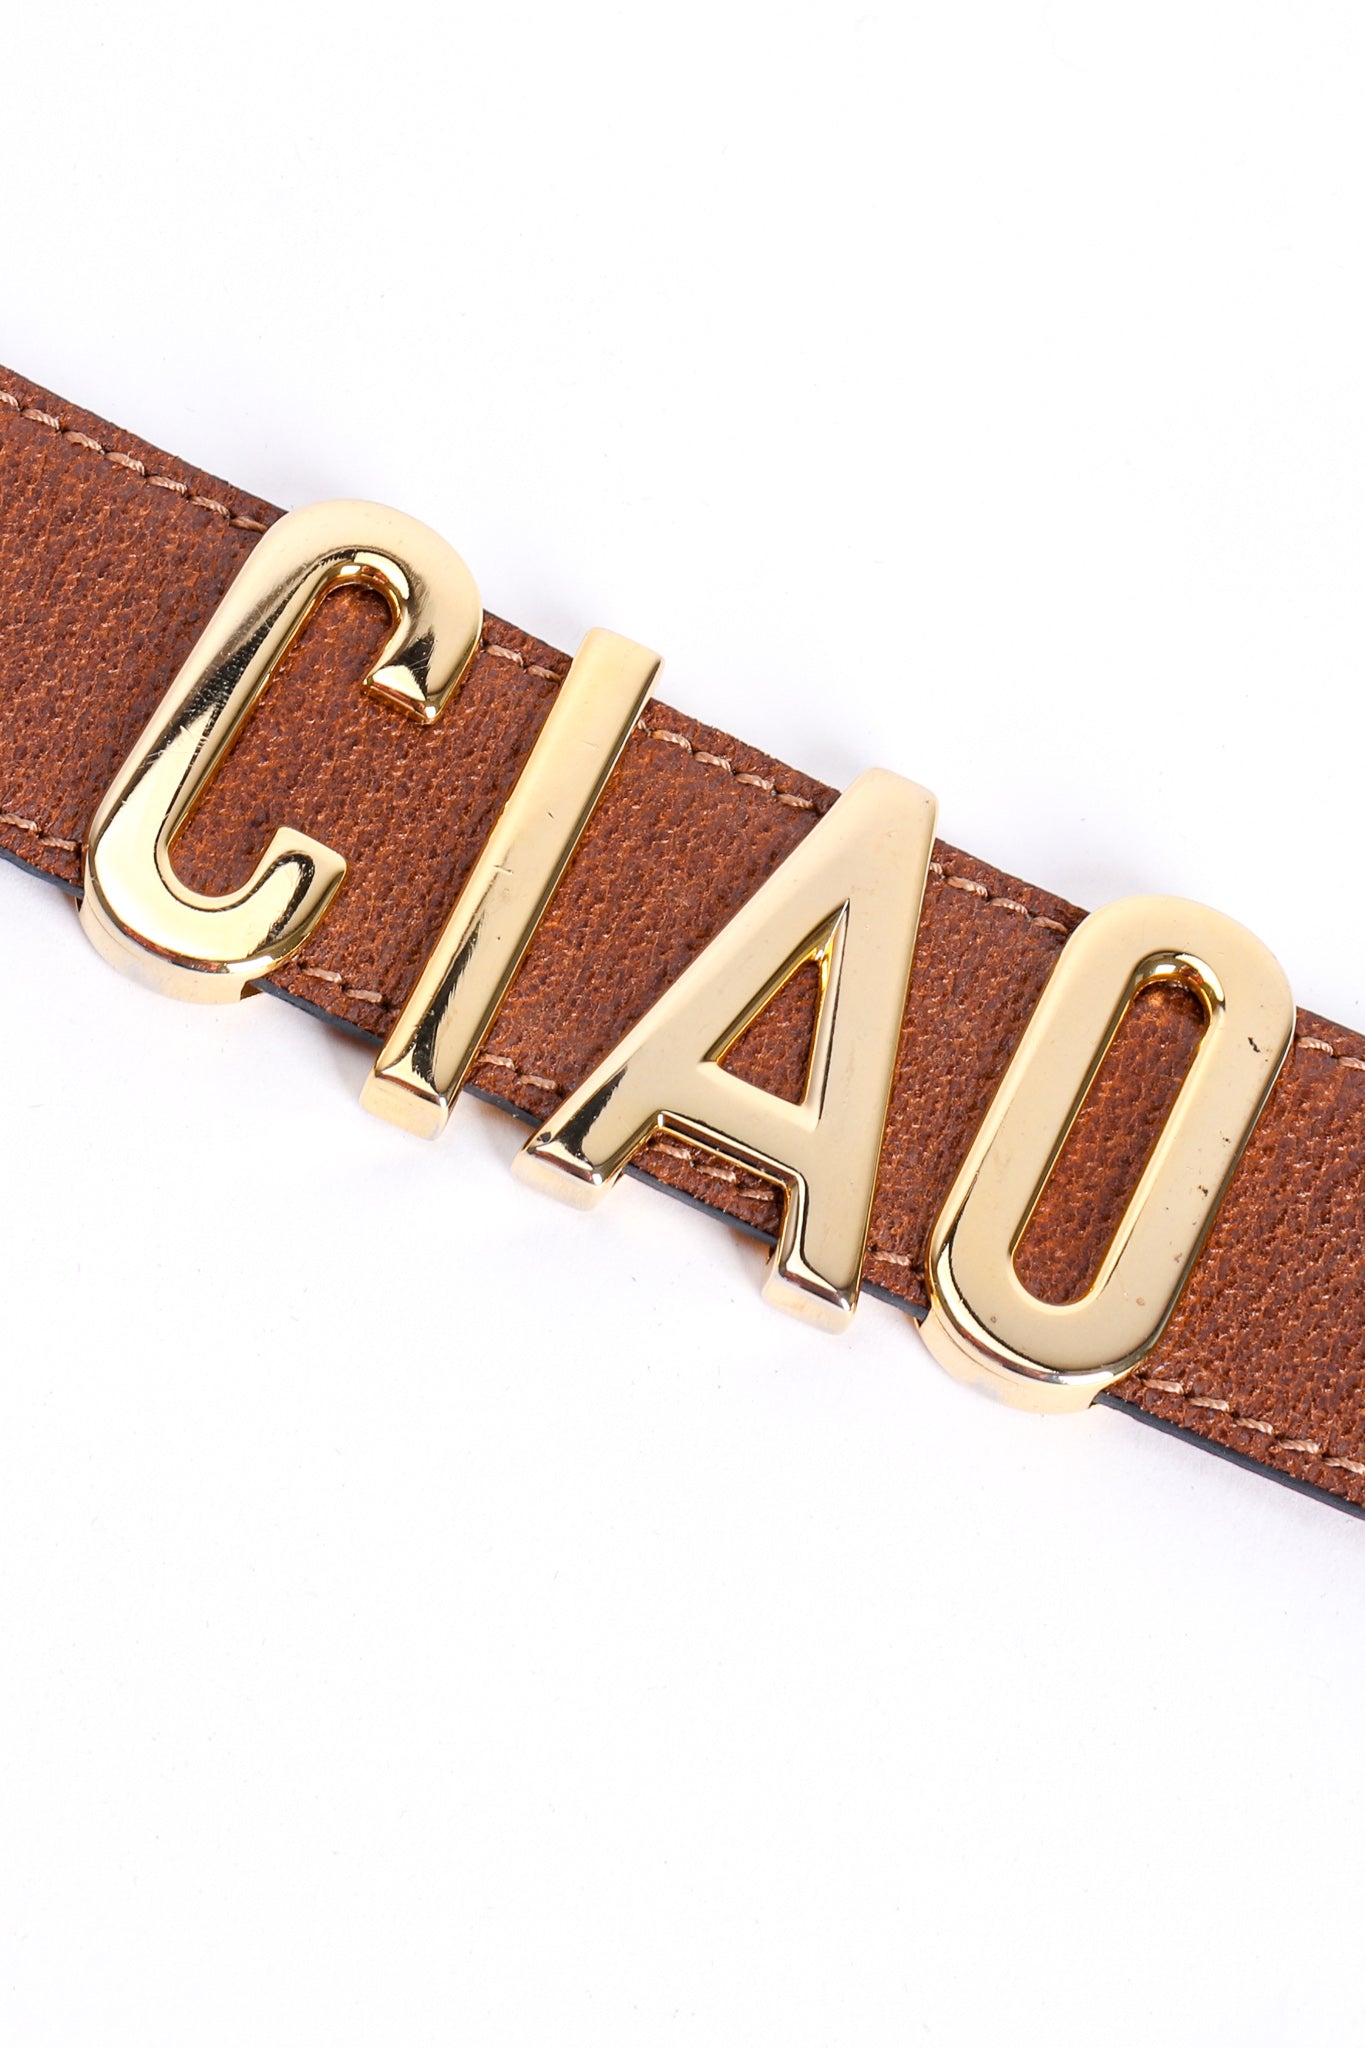 Vintage Moschino Ciao Ciao Ciao Leather Belt detail at Recess Los Angeles